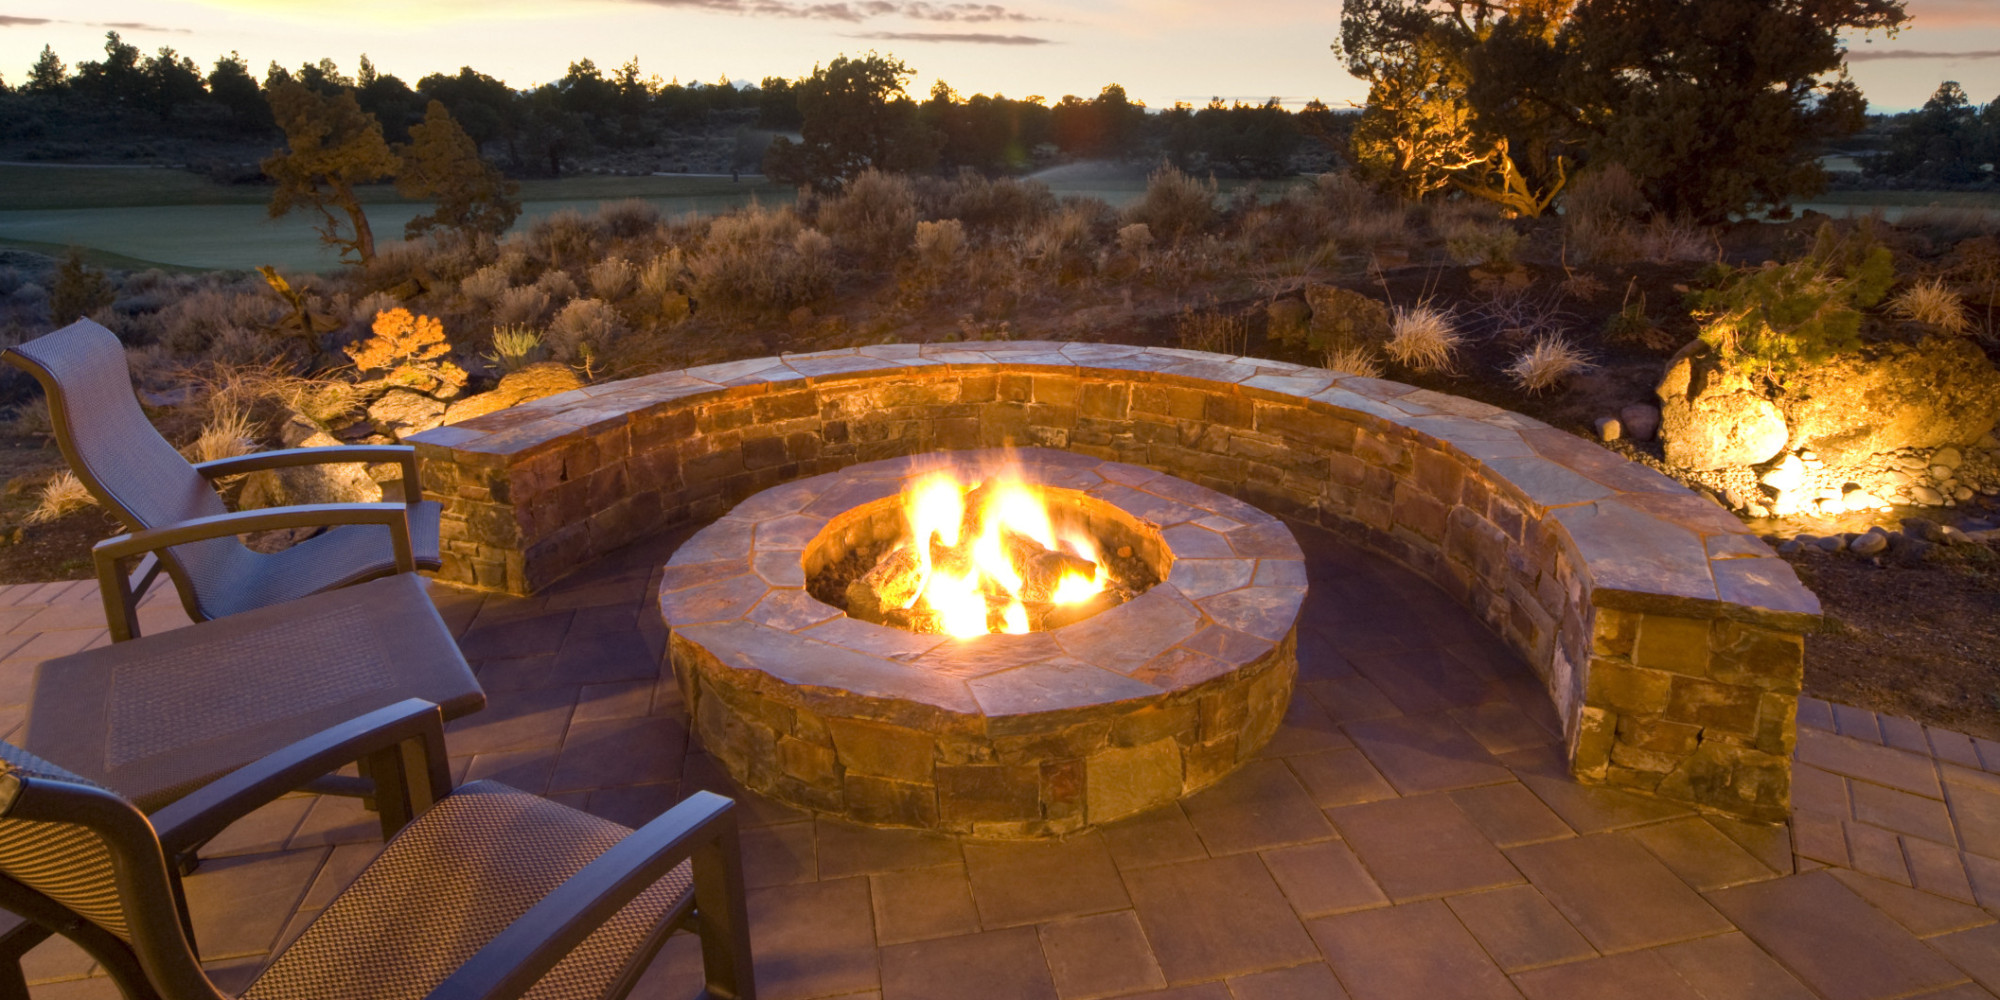 9 Ideas That'll Convince You to Add a Fire Pit to Your Backyard | HuffPost